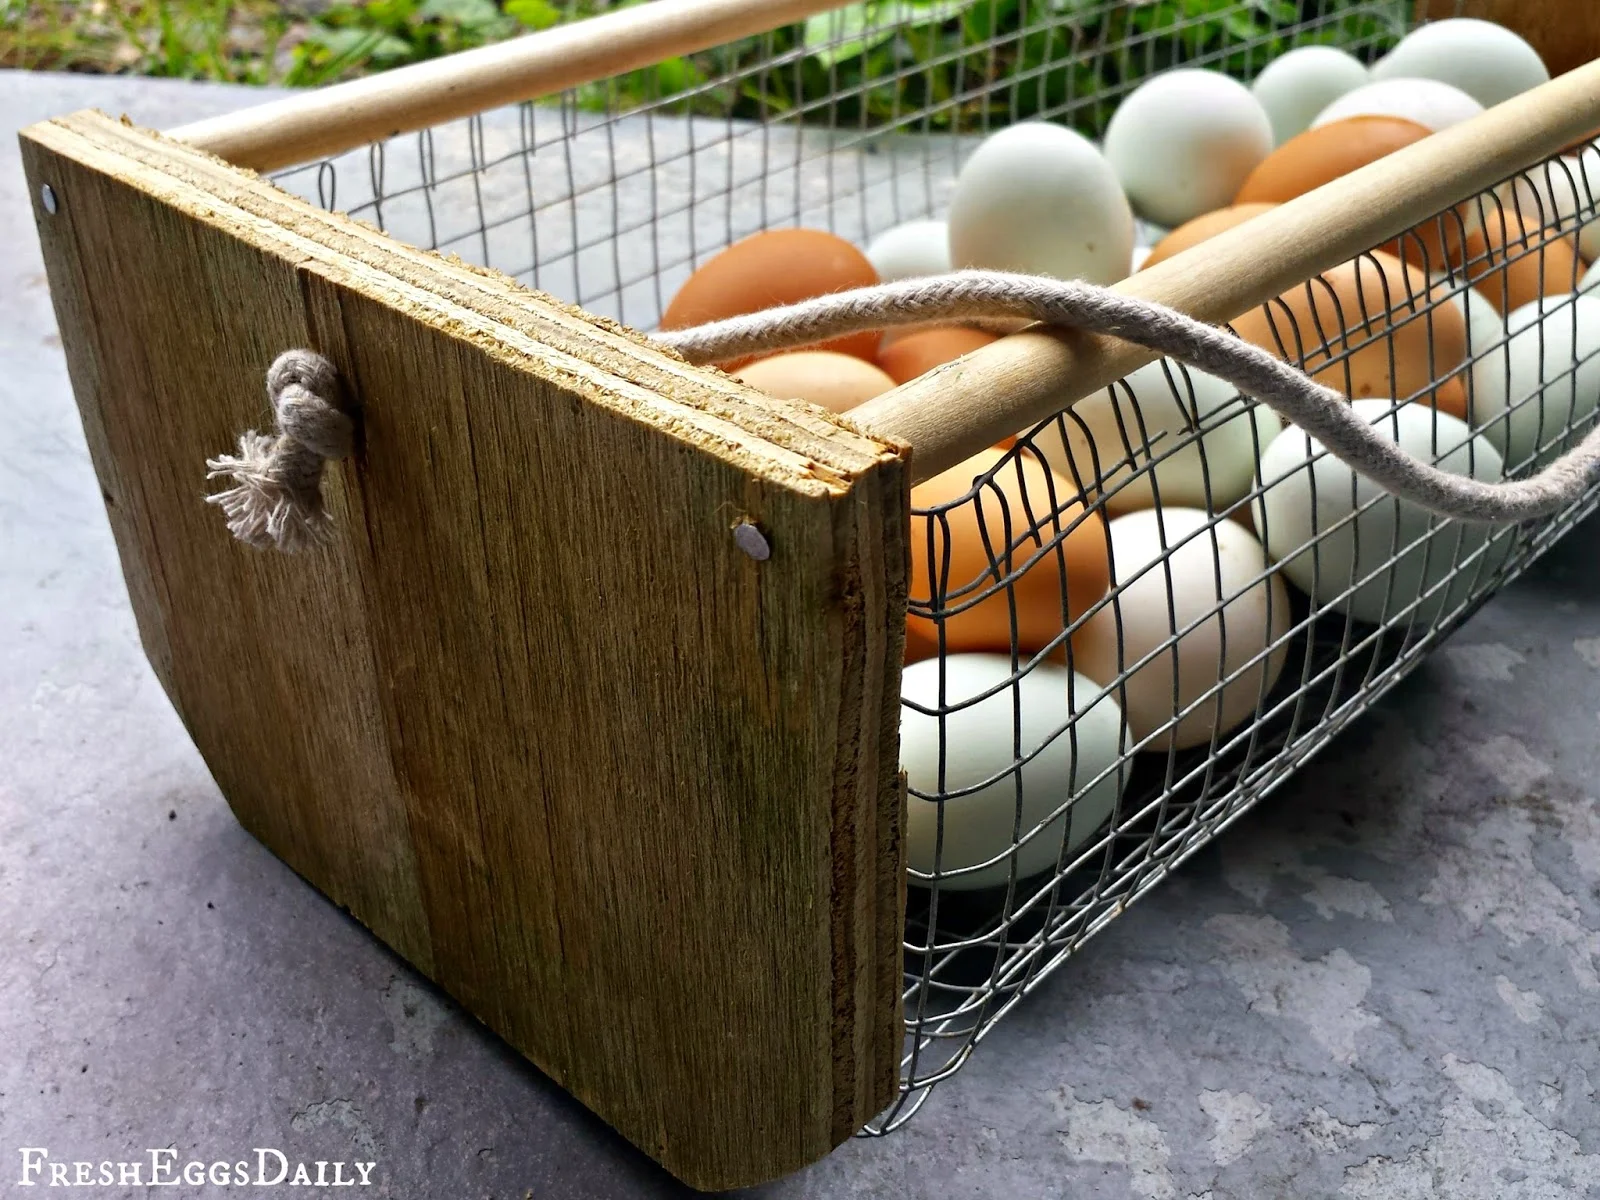 DIY Wood and Wire New England Clam Hod Egg Basket - Fresh Eggs